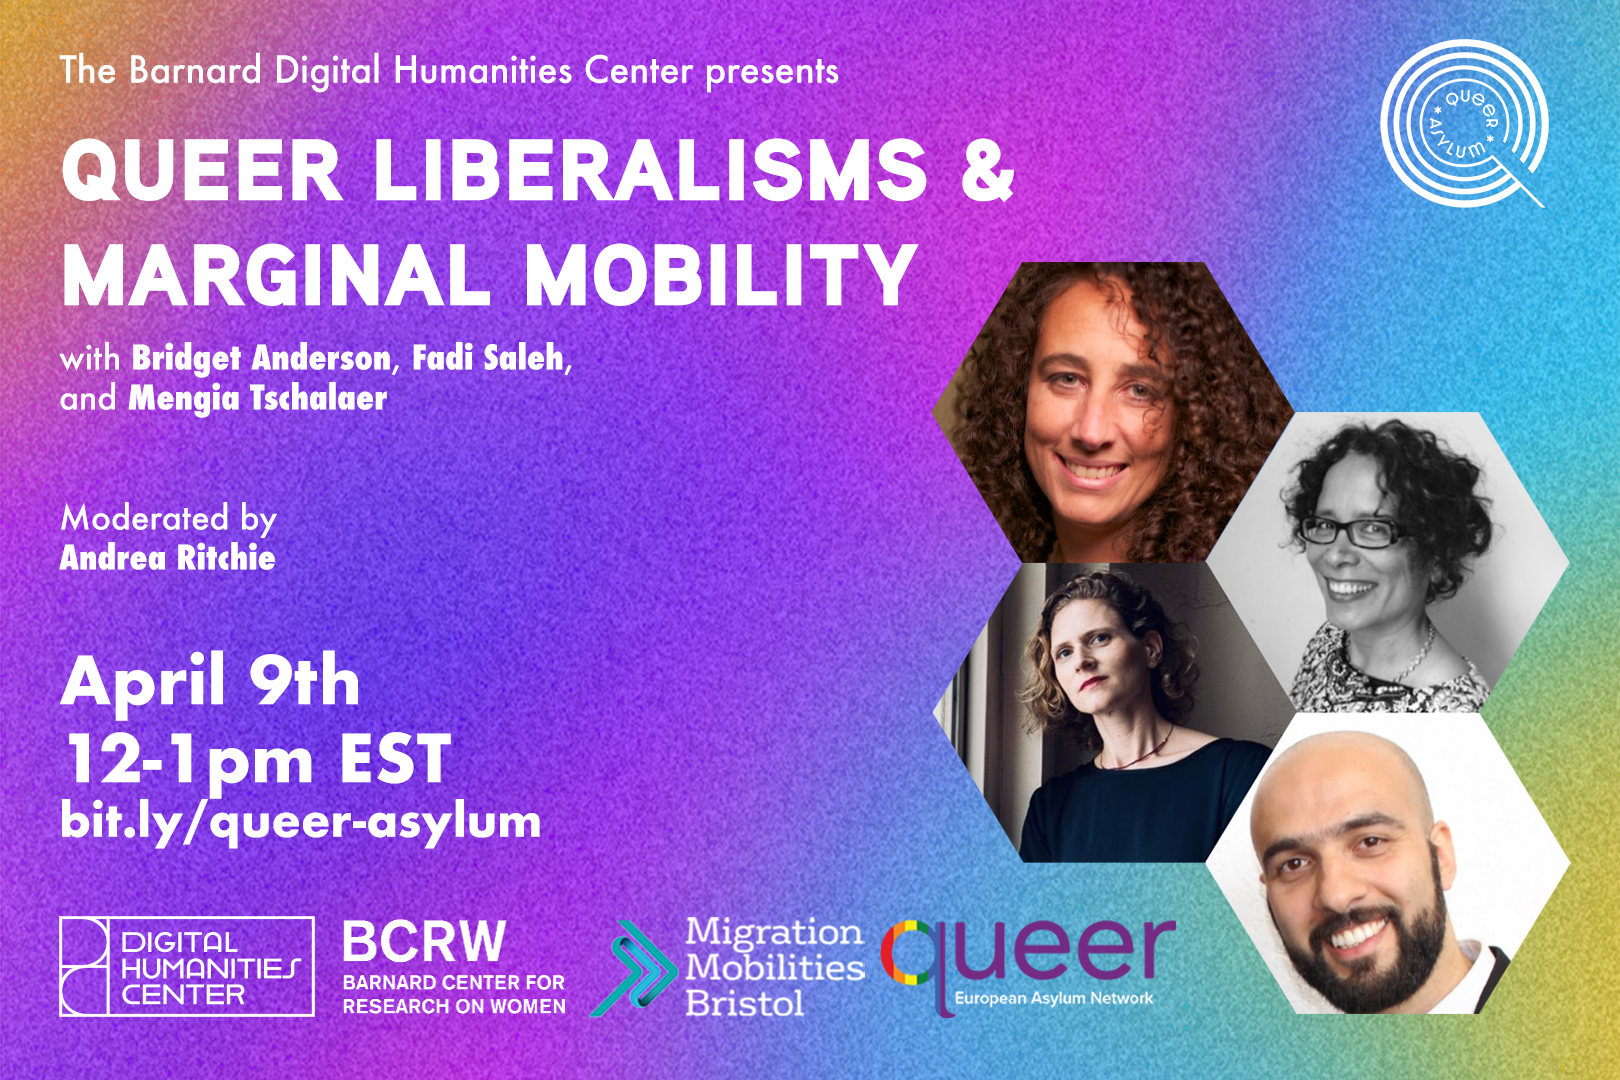 Slide with event information of Queer Liberalisms & Migrational Mobility